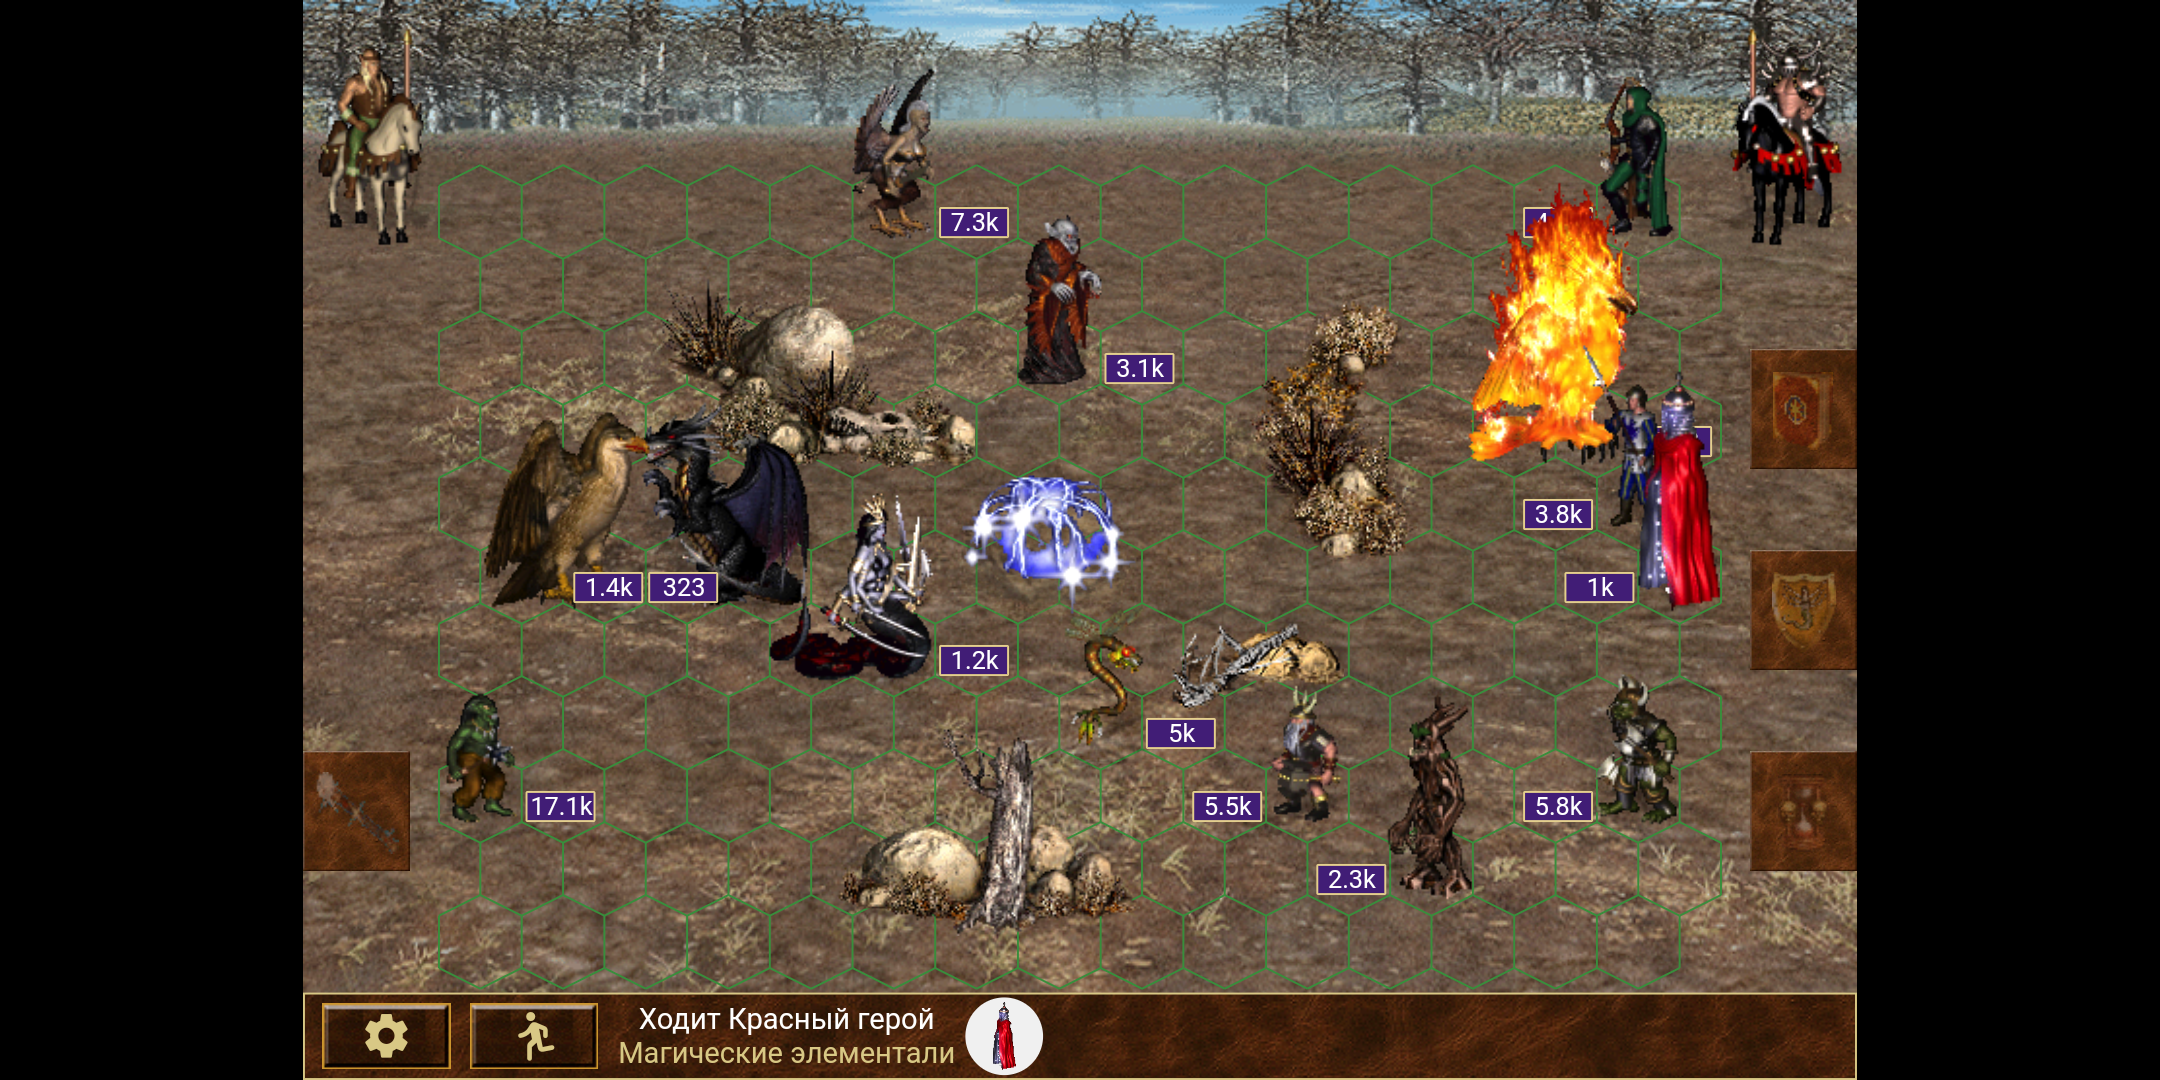 Heroes of might and magic 3